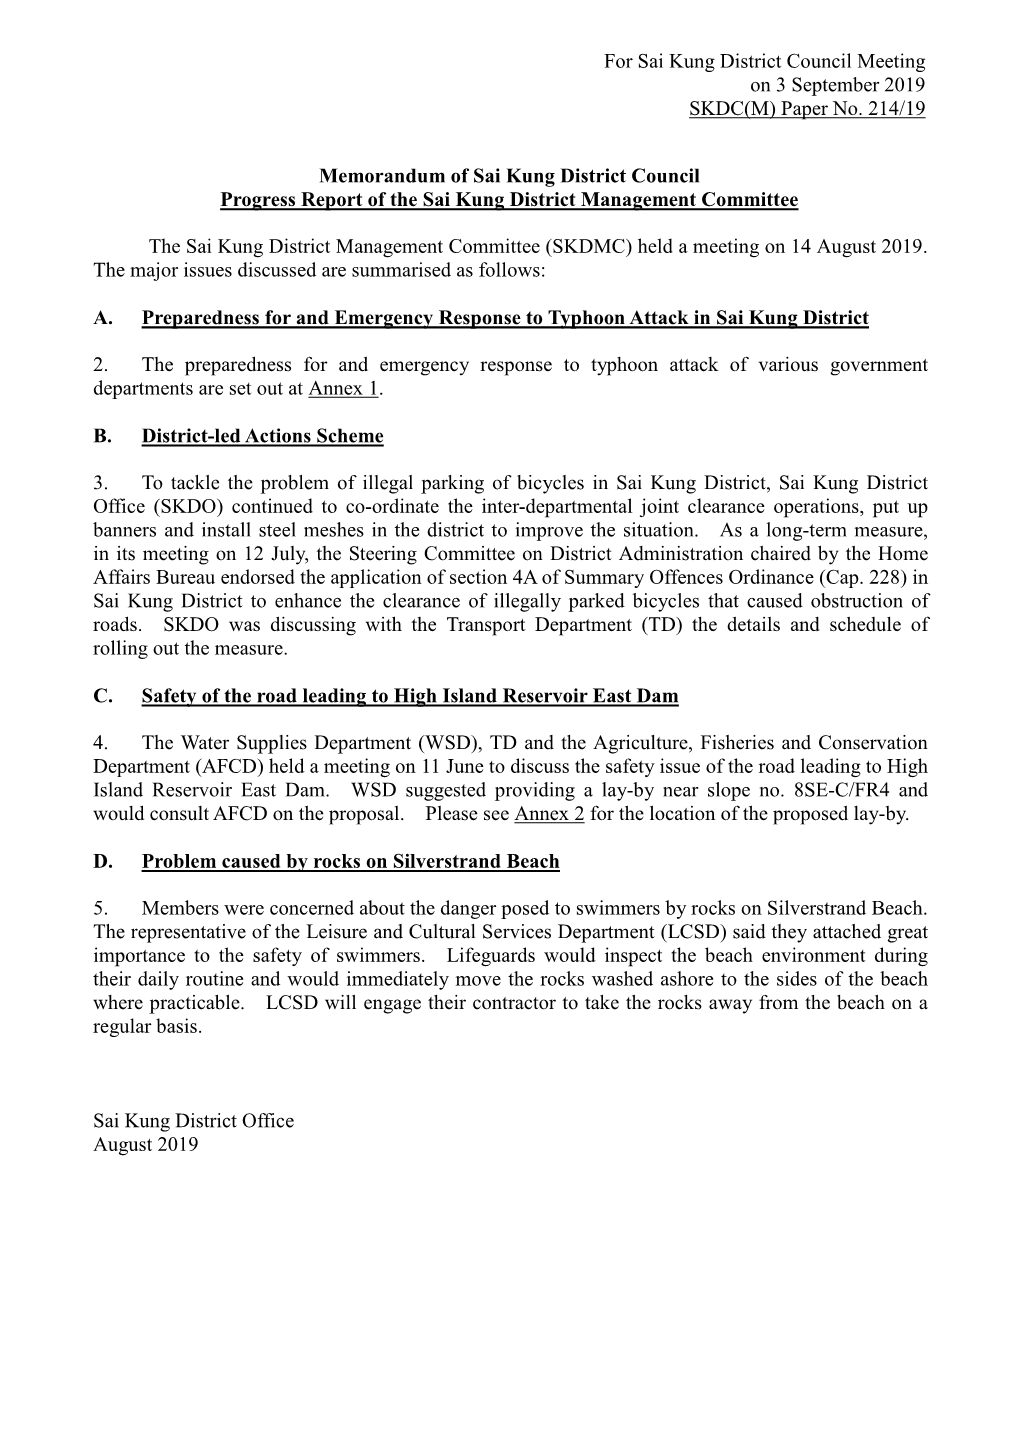 For Sai Kung District Council Meeting on 3 September 2019 SKDC(M) Paper No